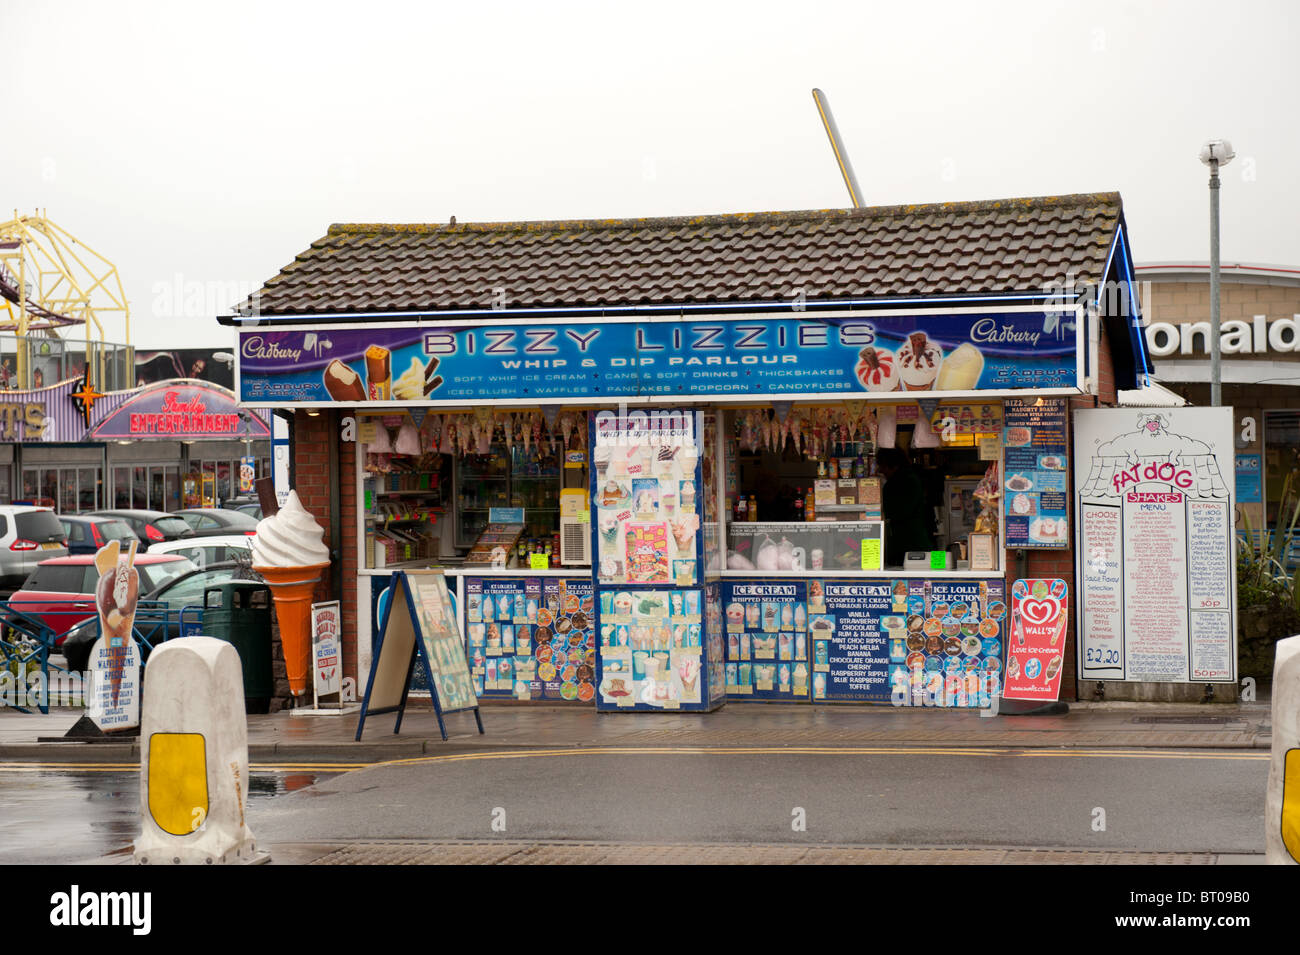 Bizzy Lizzies Seaside sweet shop Skegness Lincolnshire UK Stock Photo